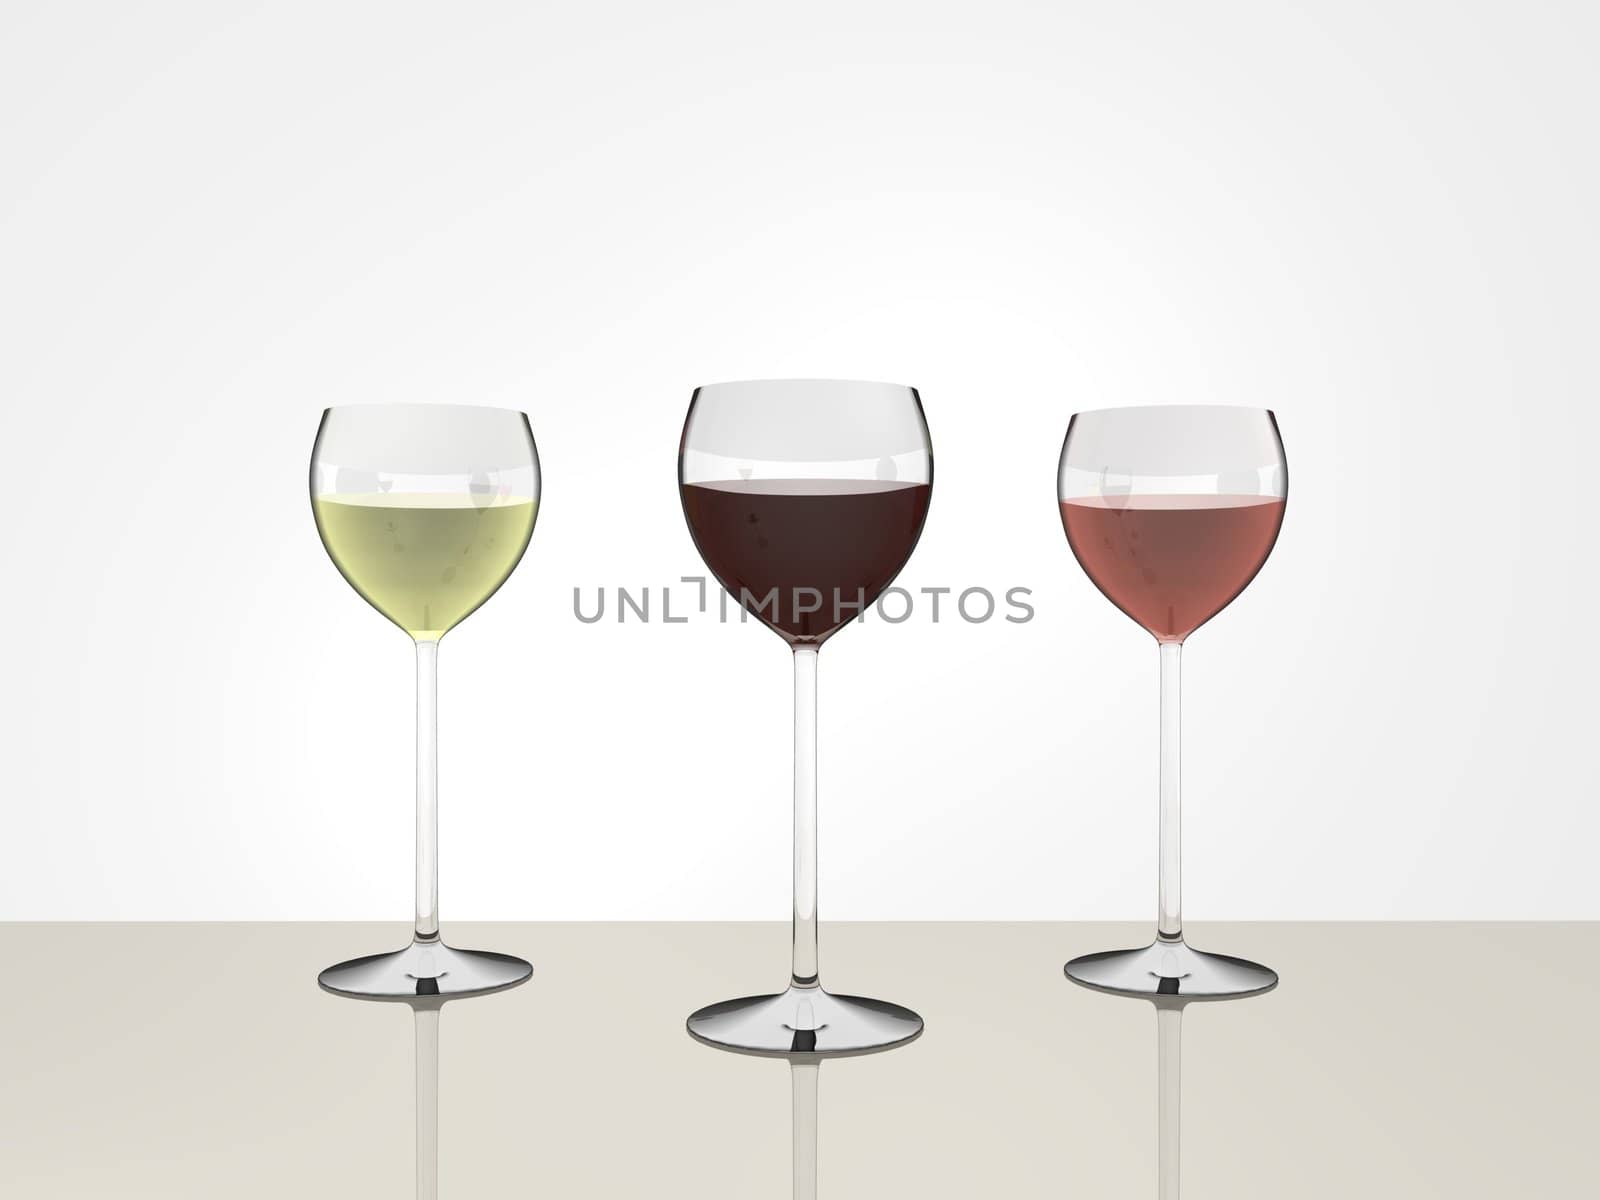 Wine glasses with 3 different types of wine.